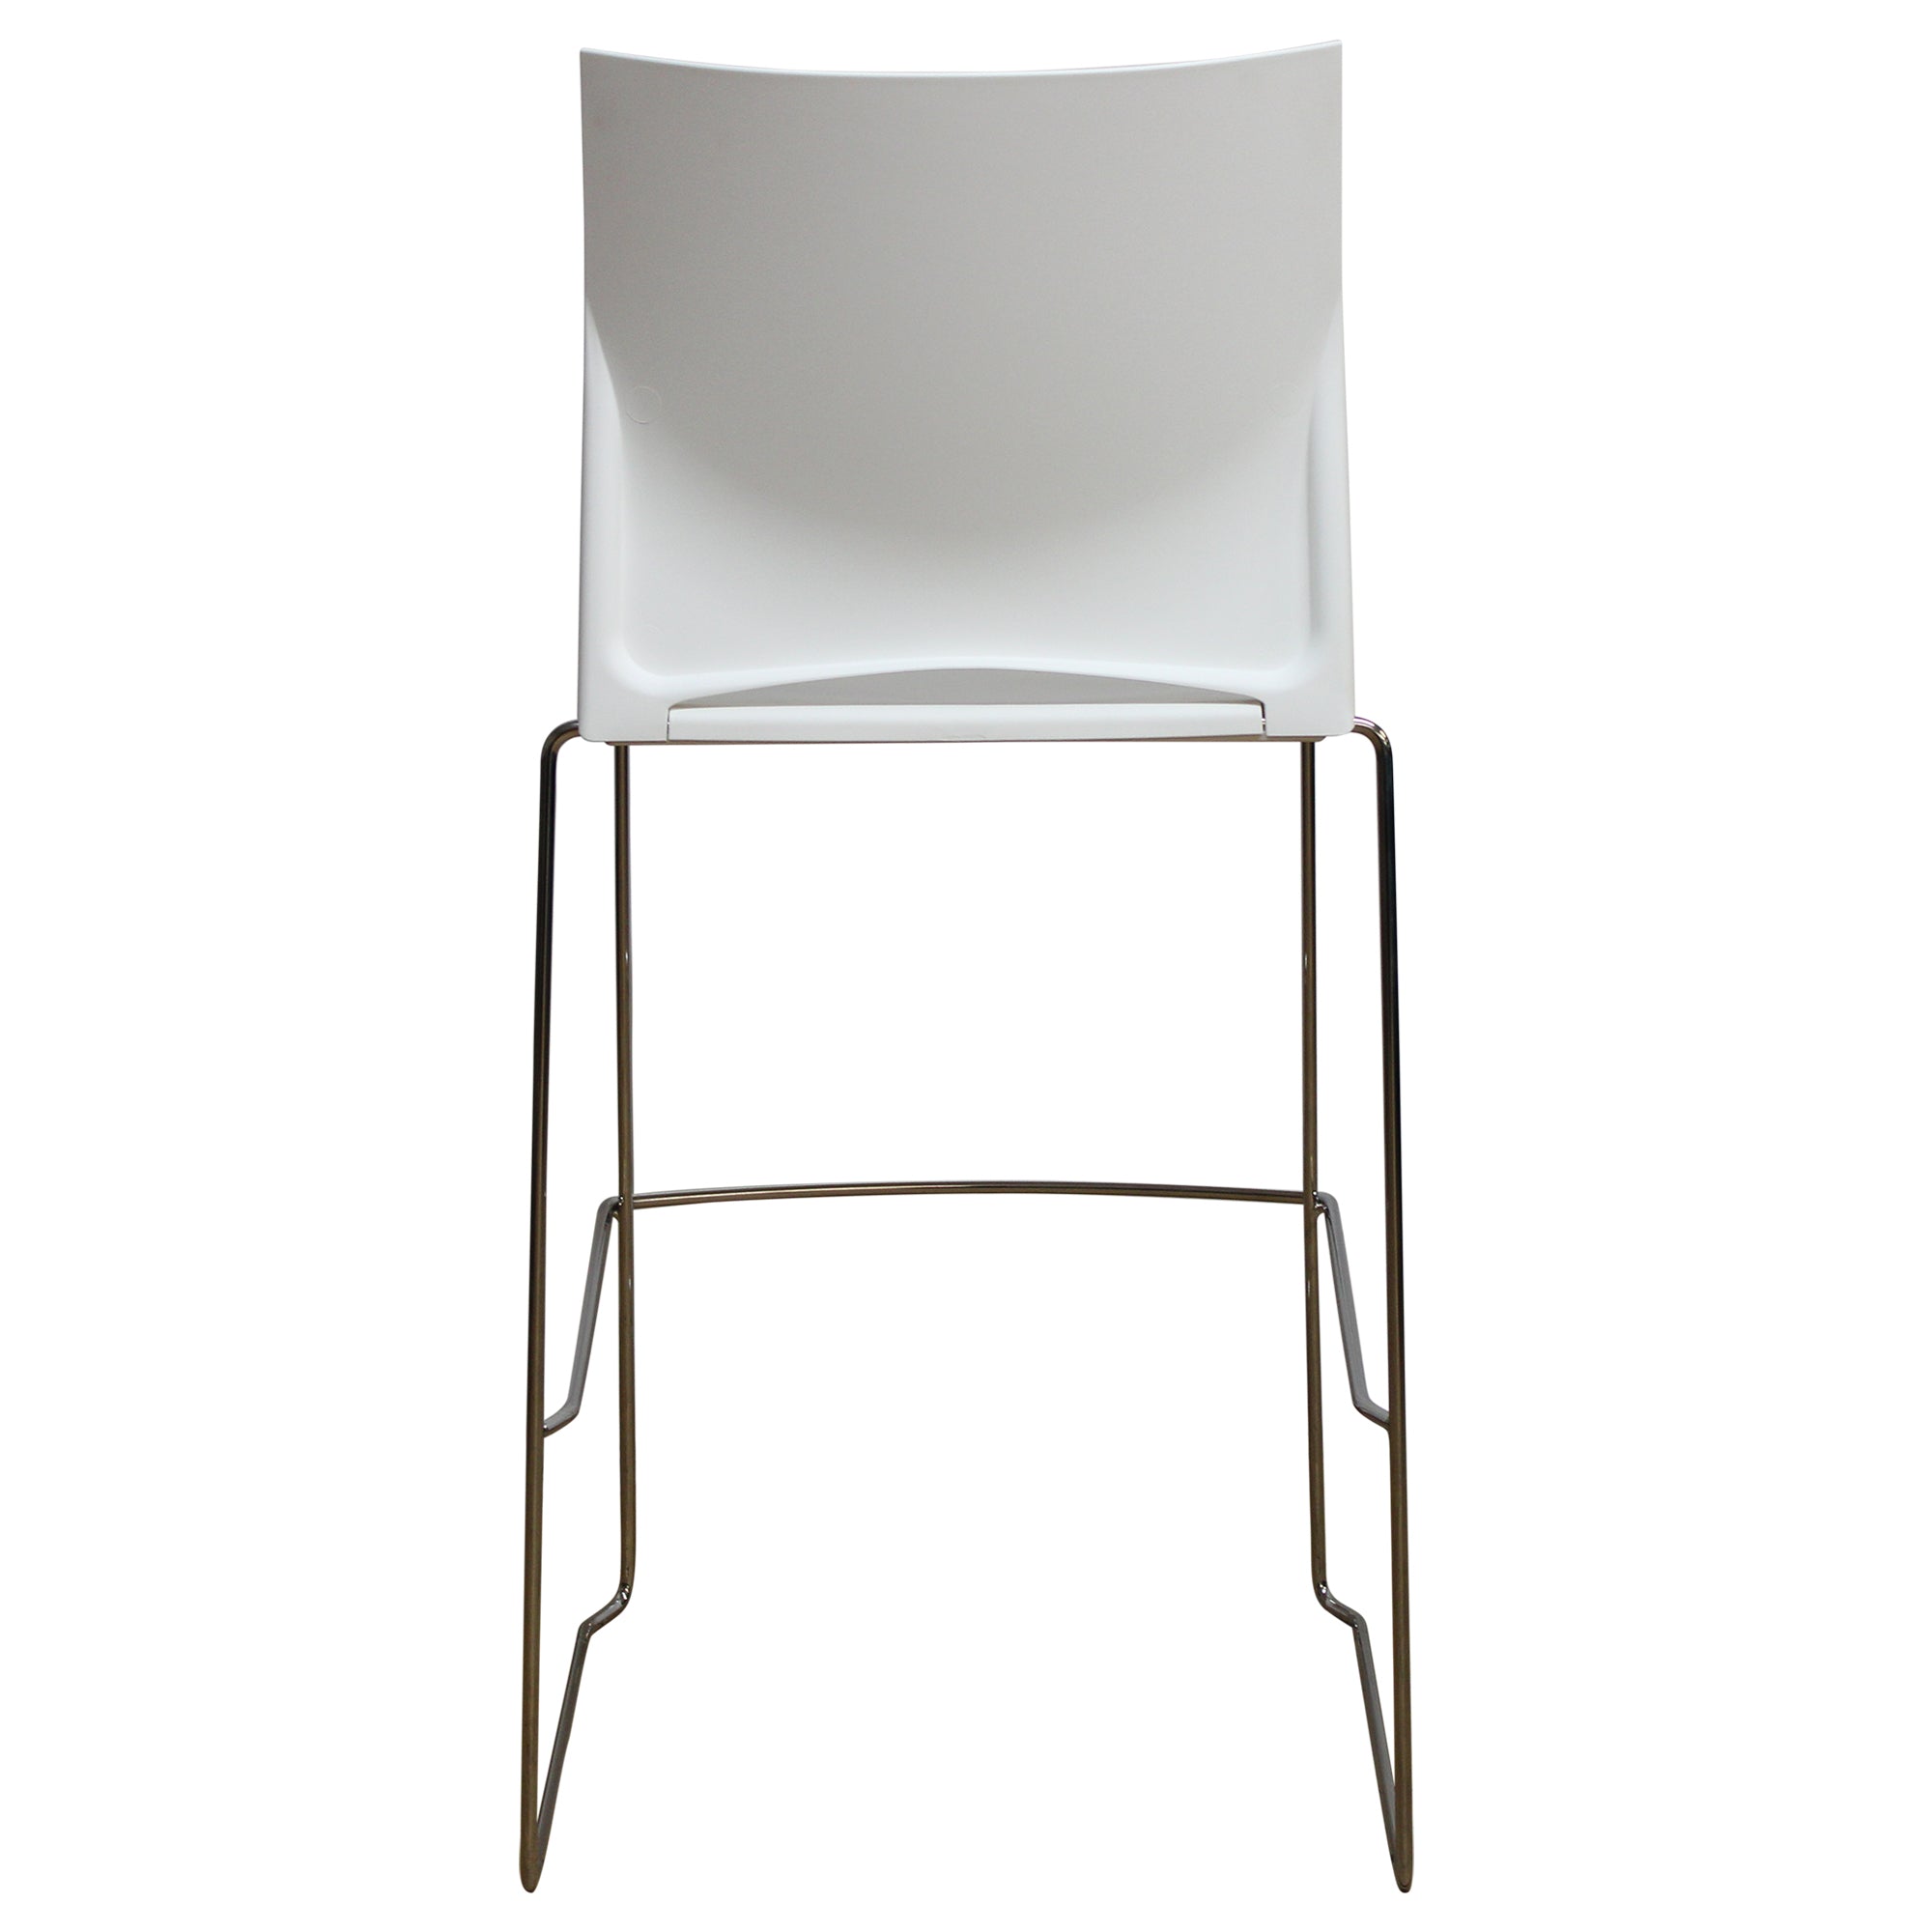 Source Seating Tier Bar Height Stool, White - Preowned